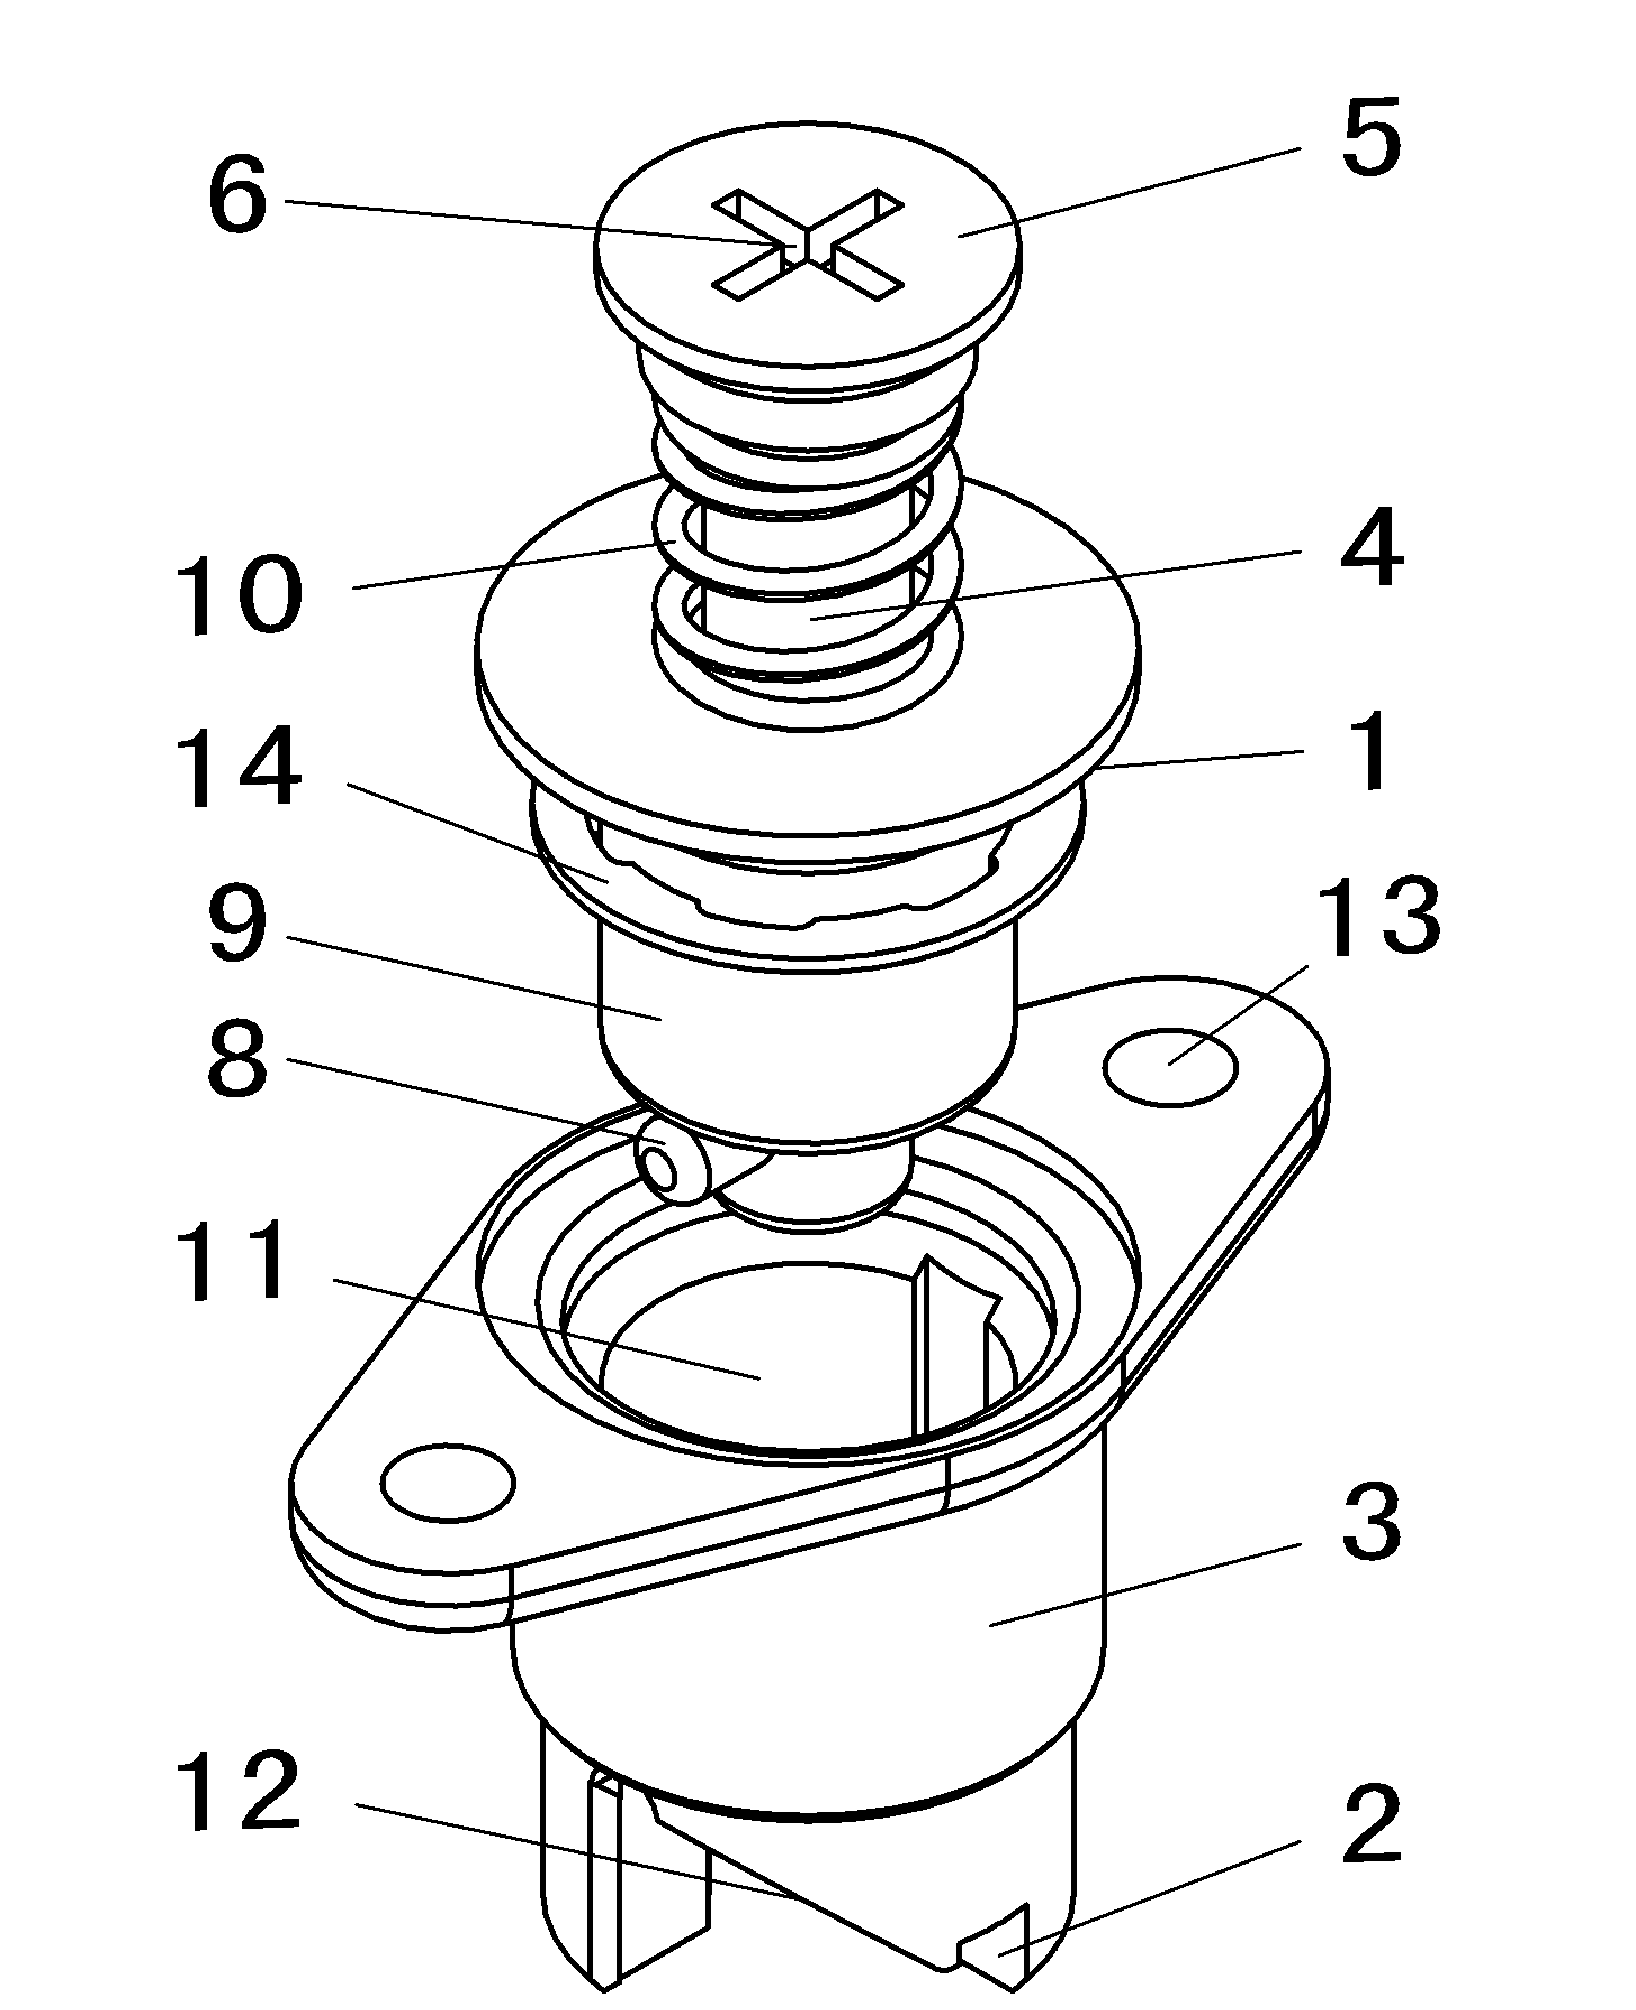 Fast-disassembly method of aeroplane access cover and bearing lock